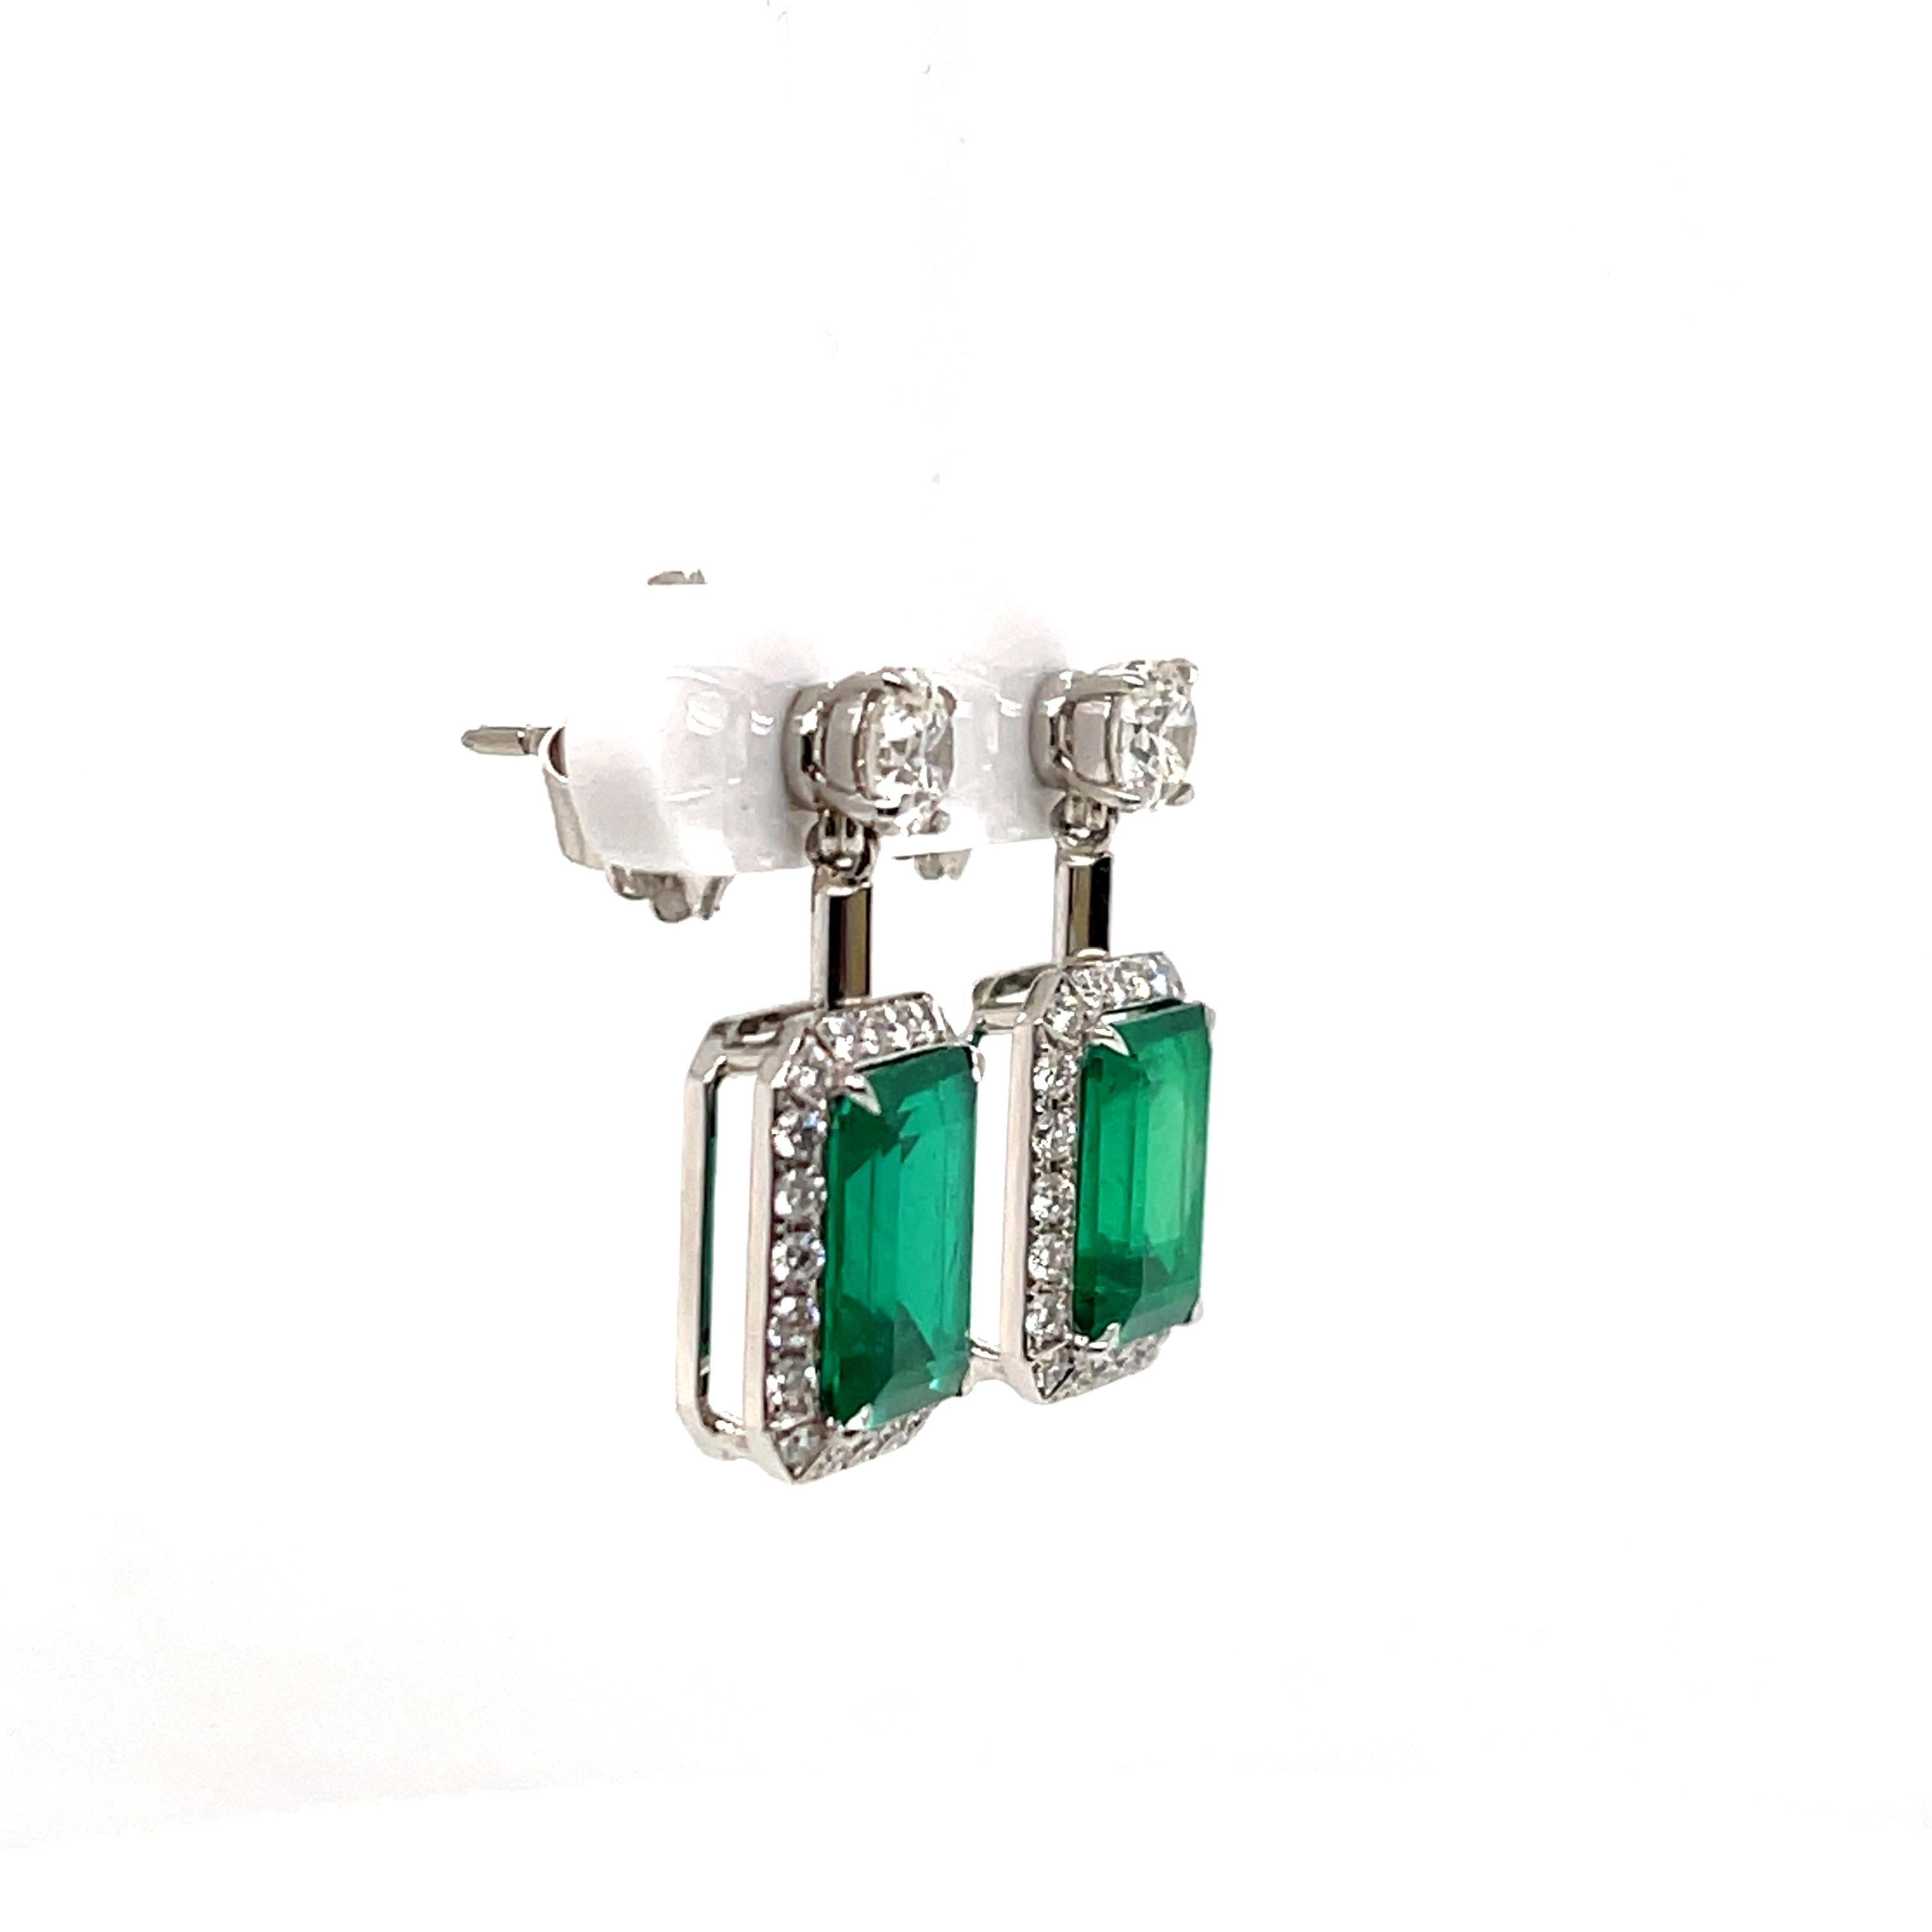 Bright green Colombian emeralds and sparkling white diamonds are always a great combination, and this pair of contemporary earrings is a perfect example why.  It is the rich, warm green that makes Colombian emeralds so beautiful and the prestigious